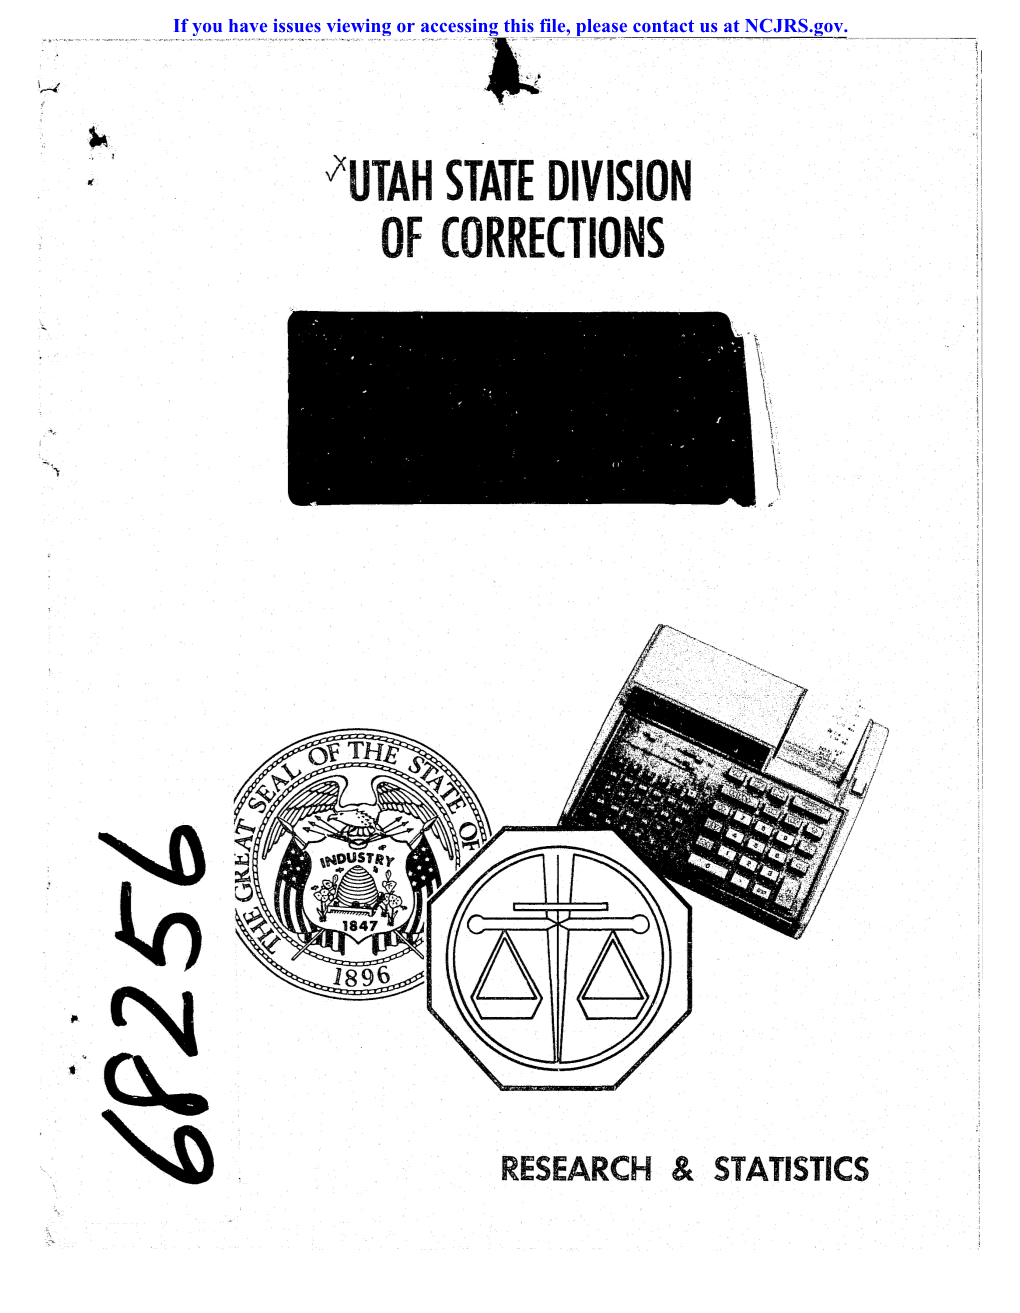 Utah State Division of Corrections